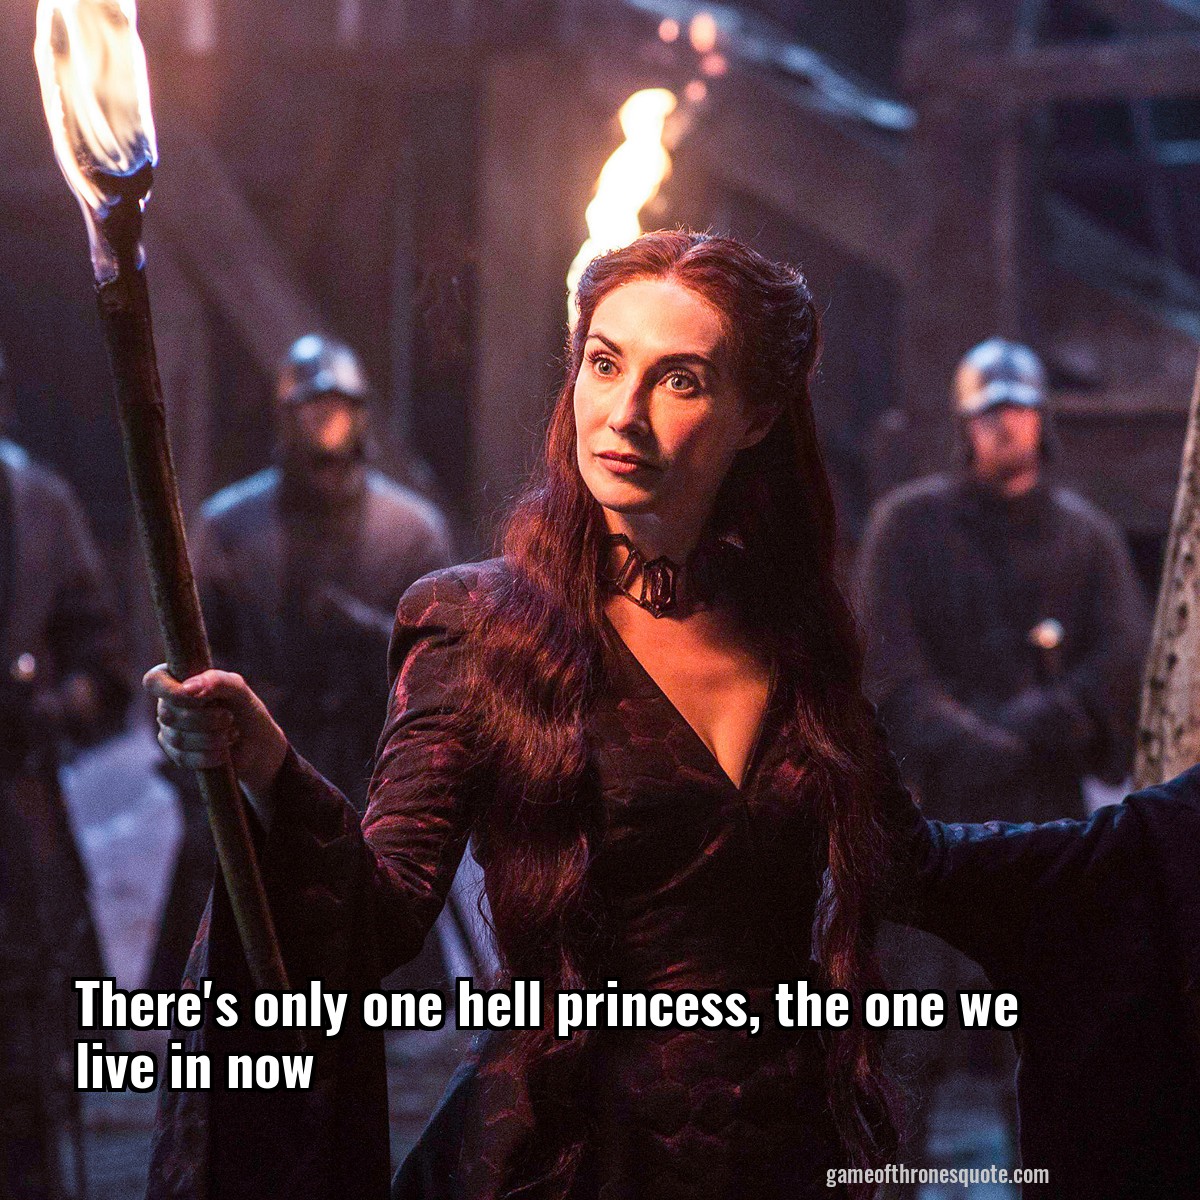 There's only one hell princess, the one we live in now